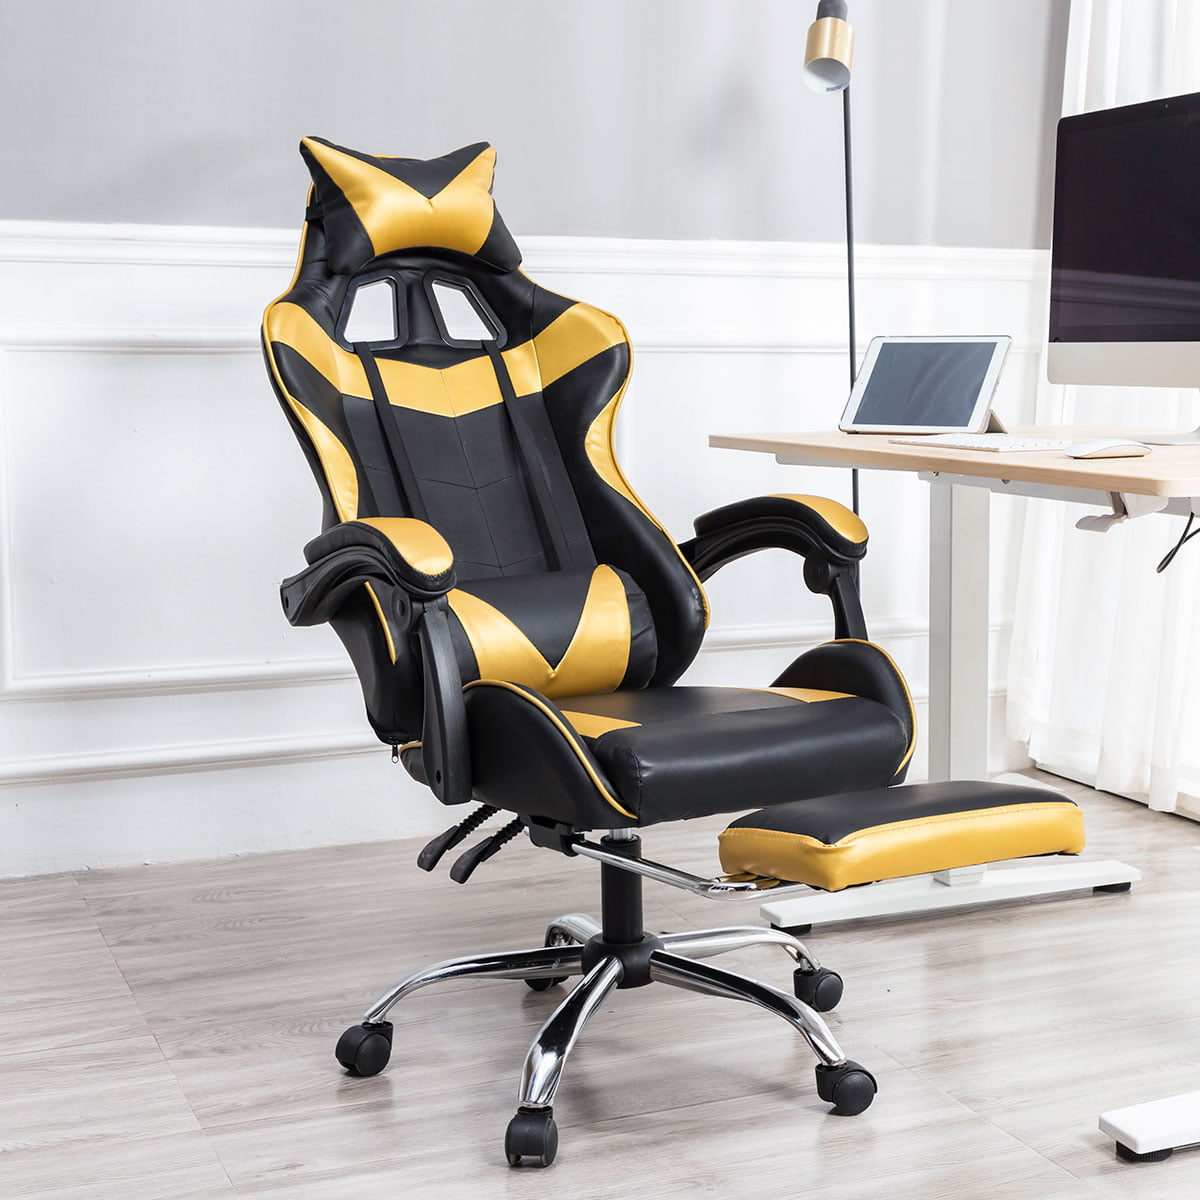 Details about   Gaming Chair Racing Ergonomic Recliner Office Computer Desk Swivel Seat Footrest 